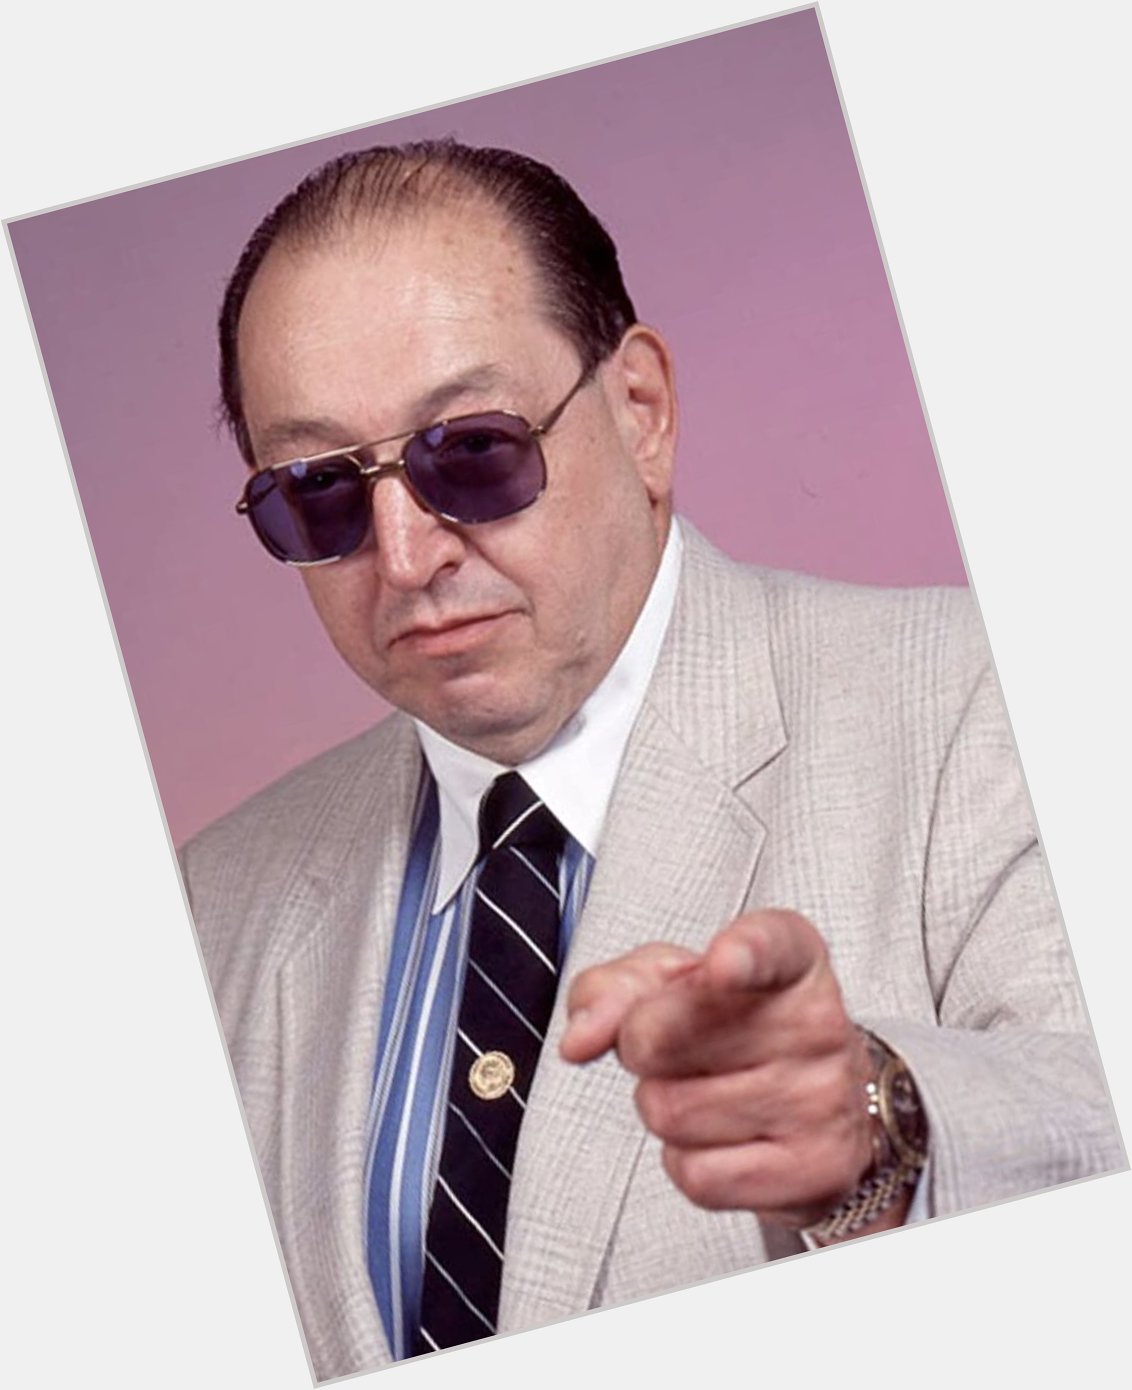 Happy Birthday to my favorite commentator of all time, Gorilla Monsoon, who would\ve been 84 today  